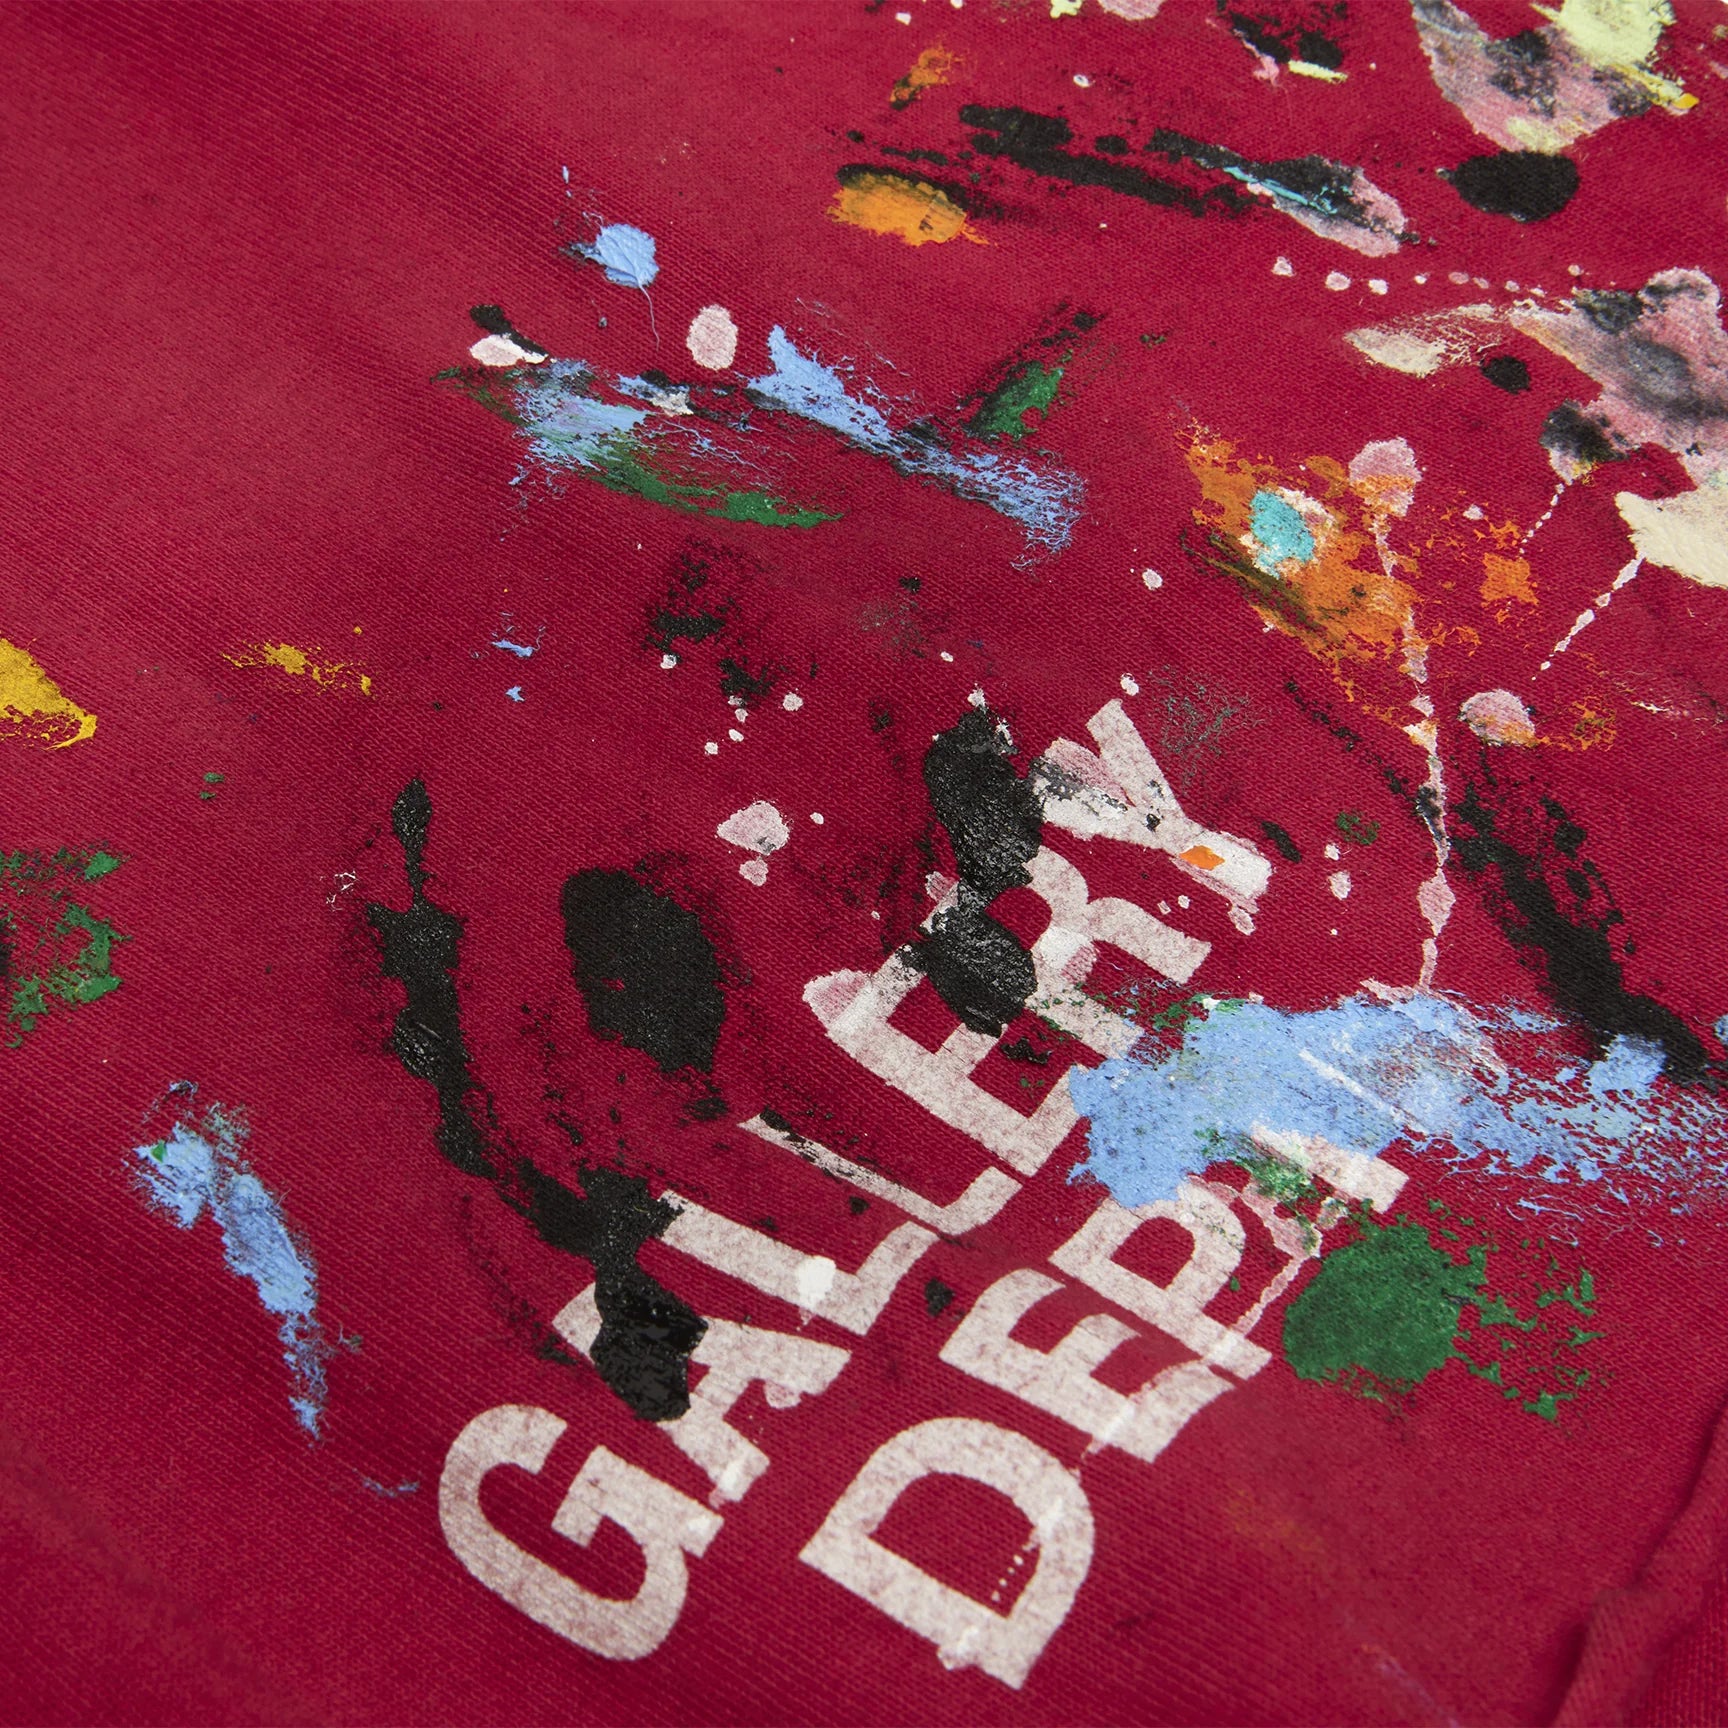 Gallery Dept Red Paint Insomnia Shorts Close Up Paint